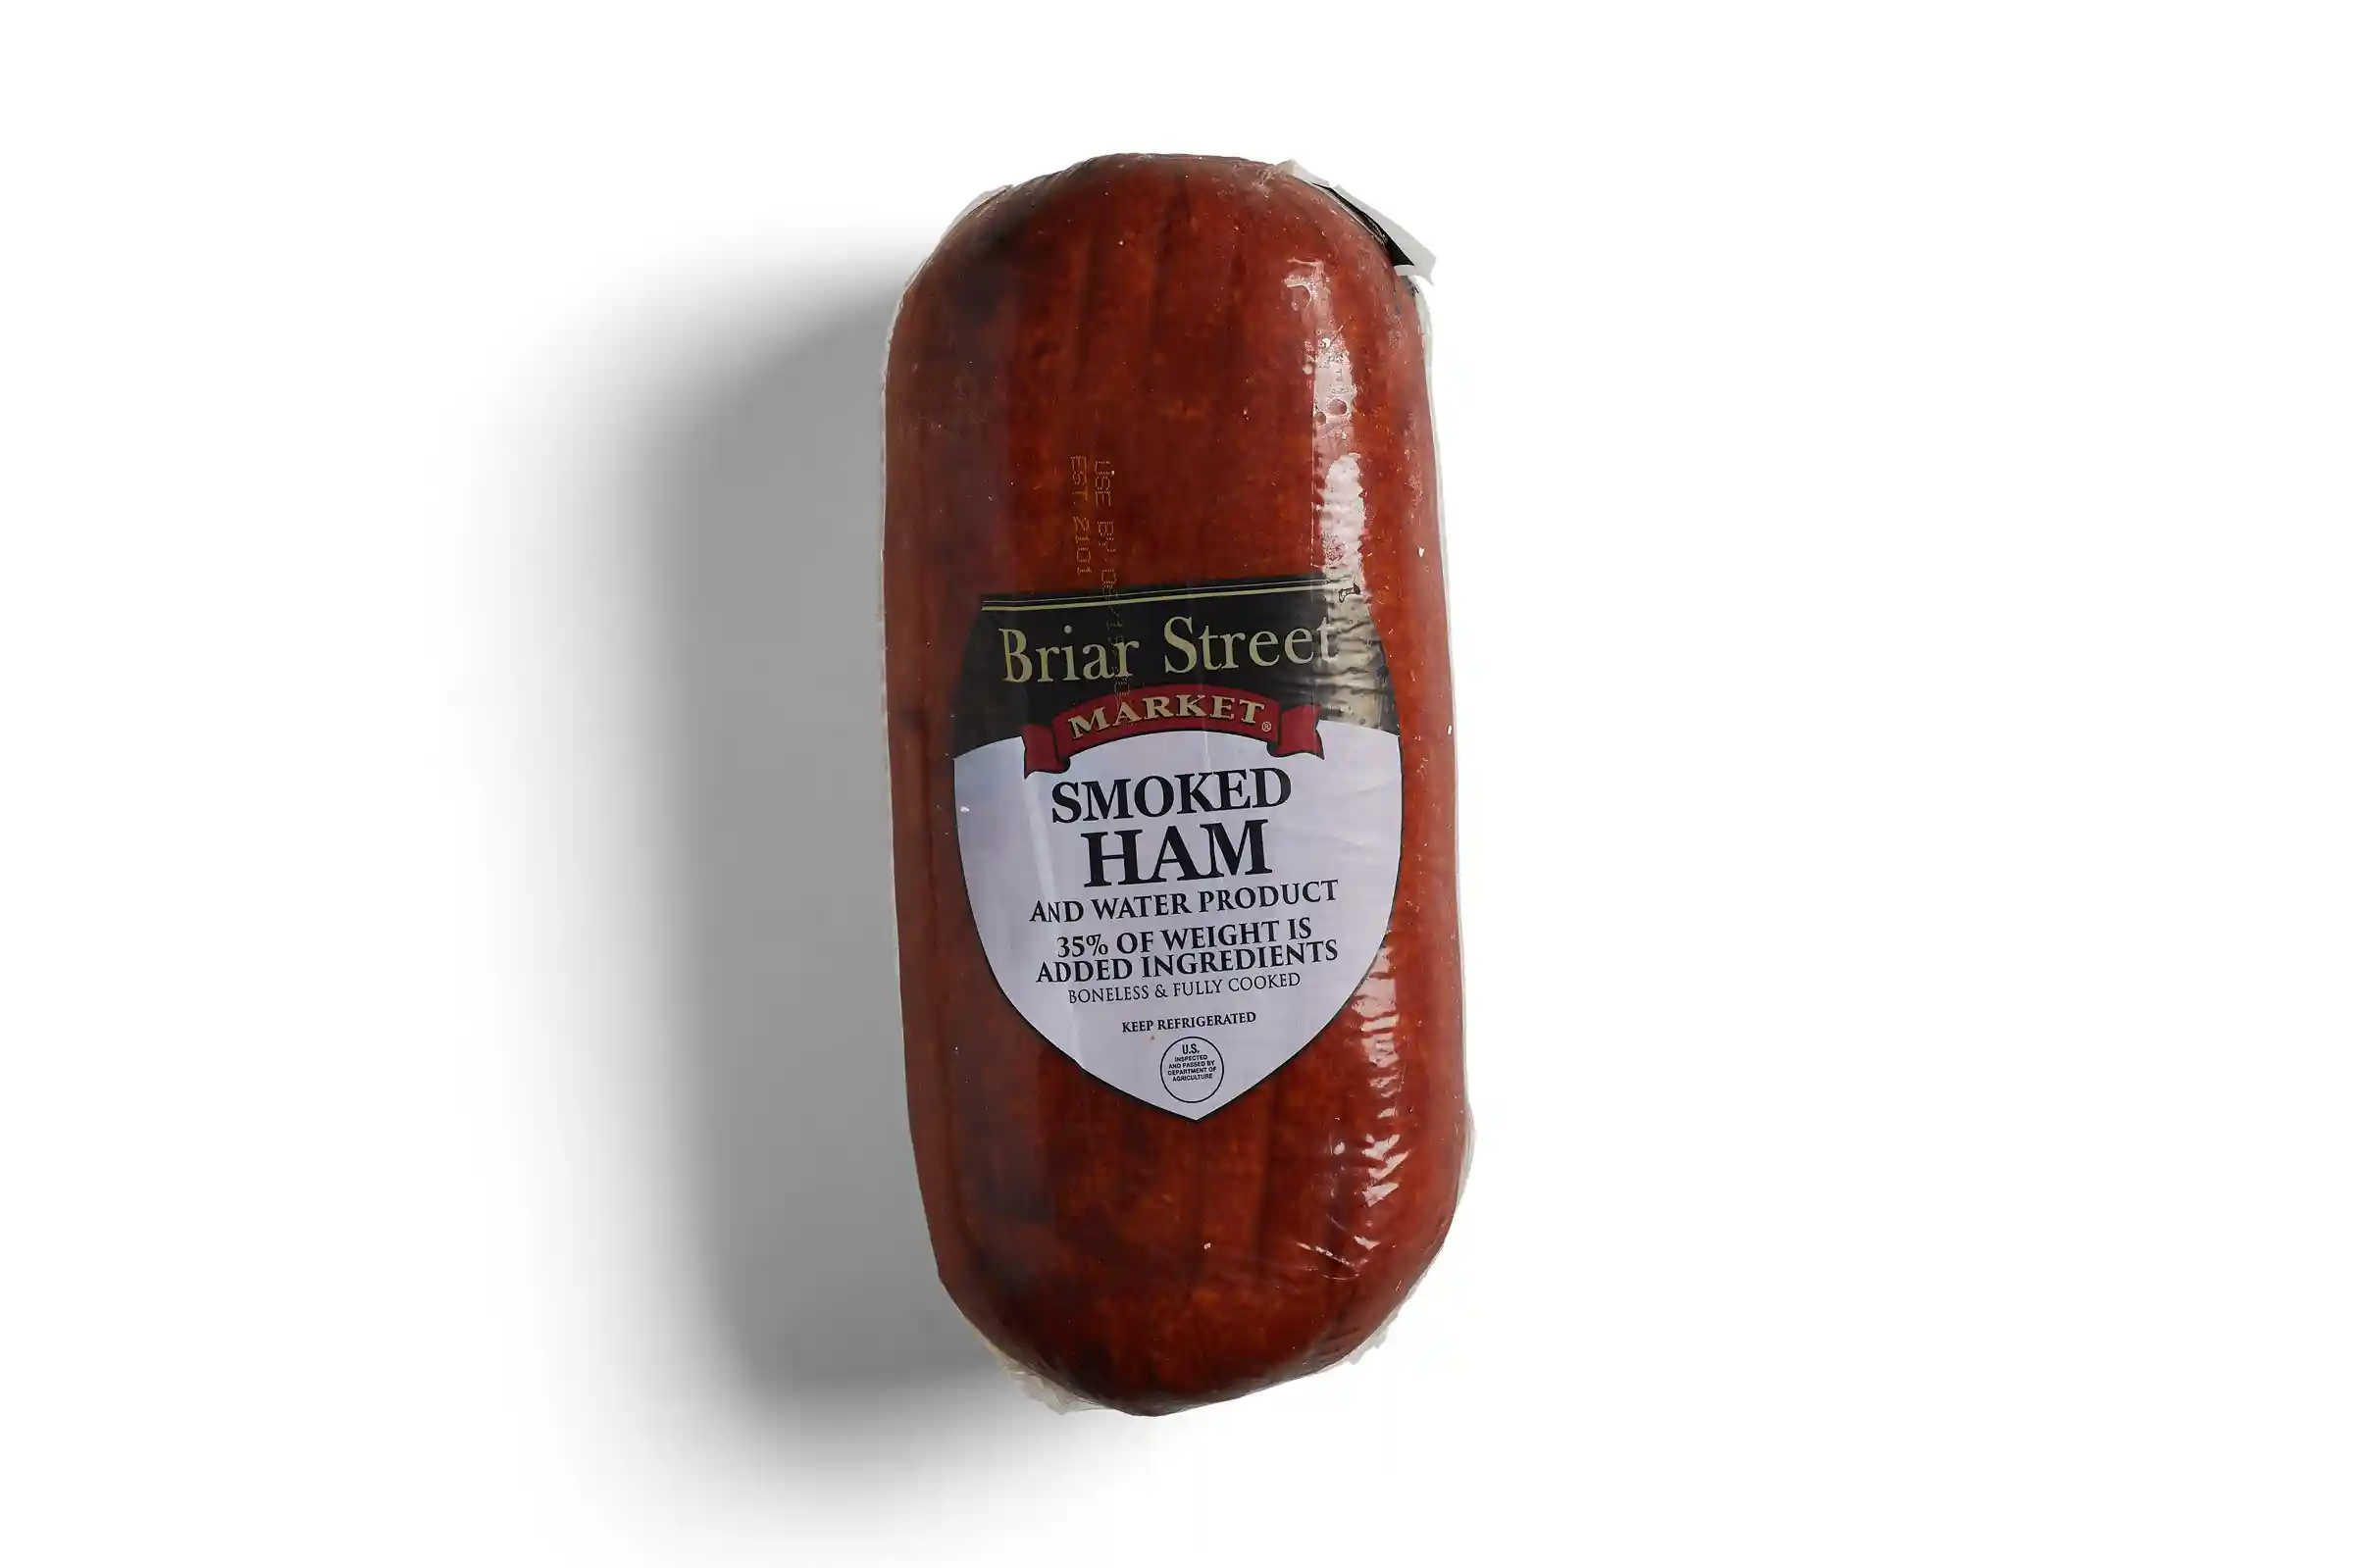 Briar Street Market® Fully Cooked Boneless Smoked Ham & Water Product 35% of Weight is AI_image_21